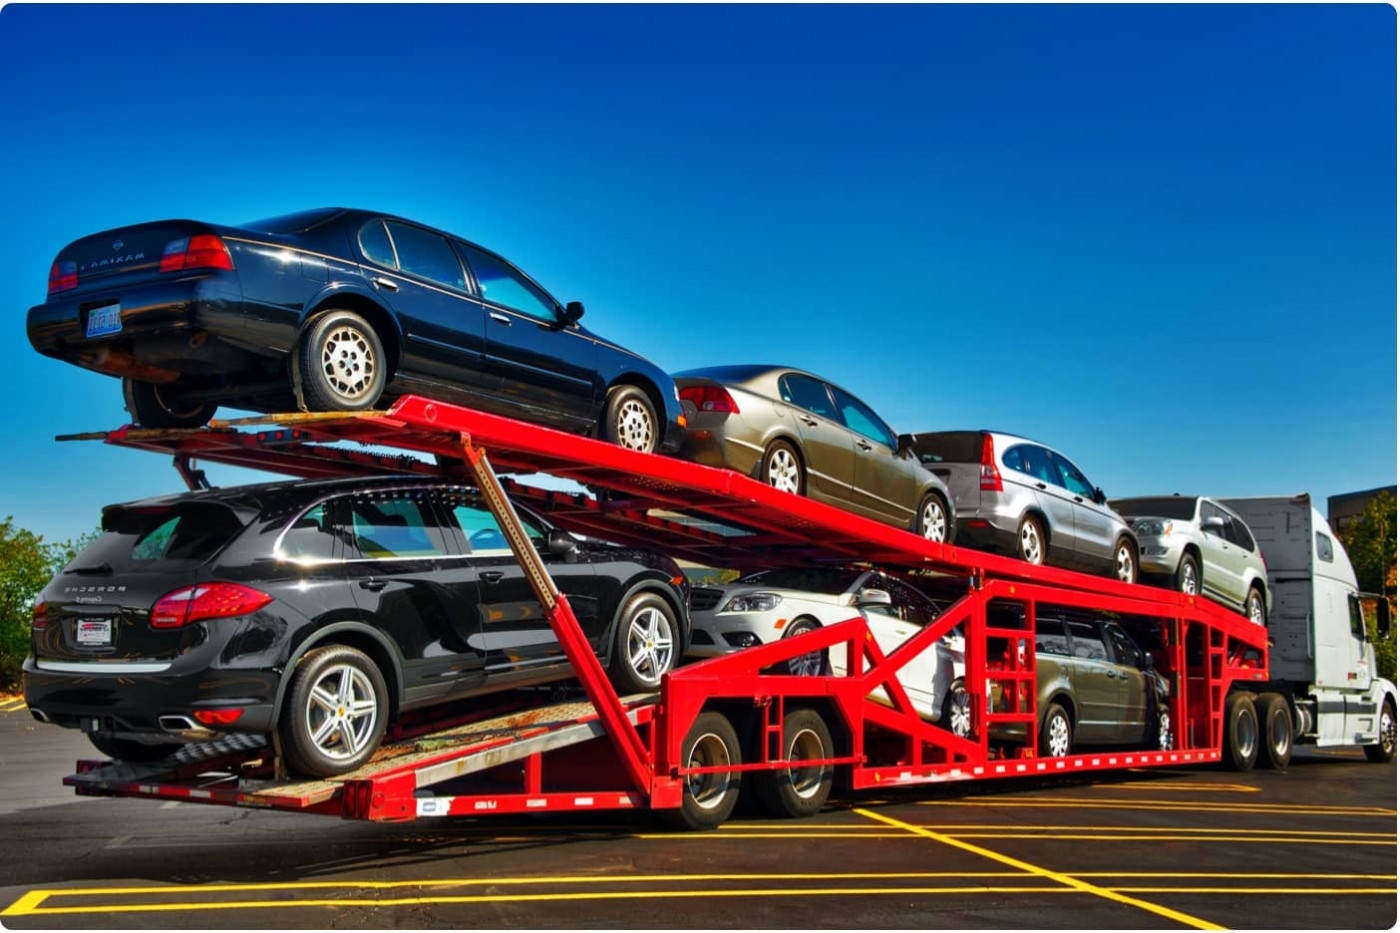  Montway Auto Transport Car shipping and auto transport